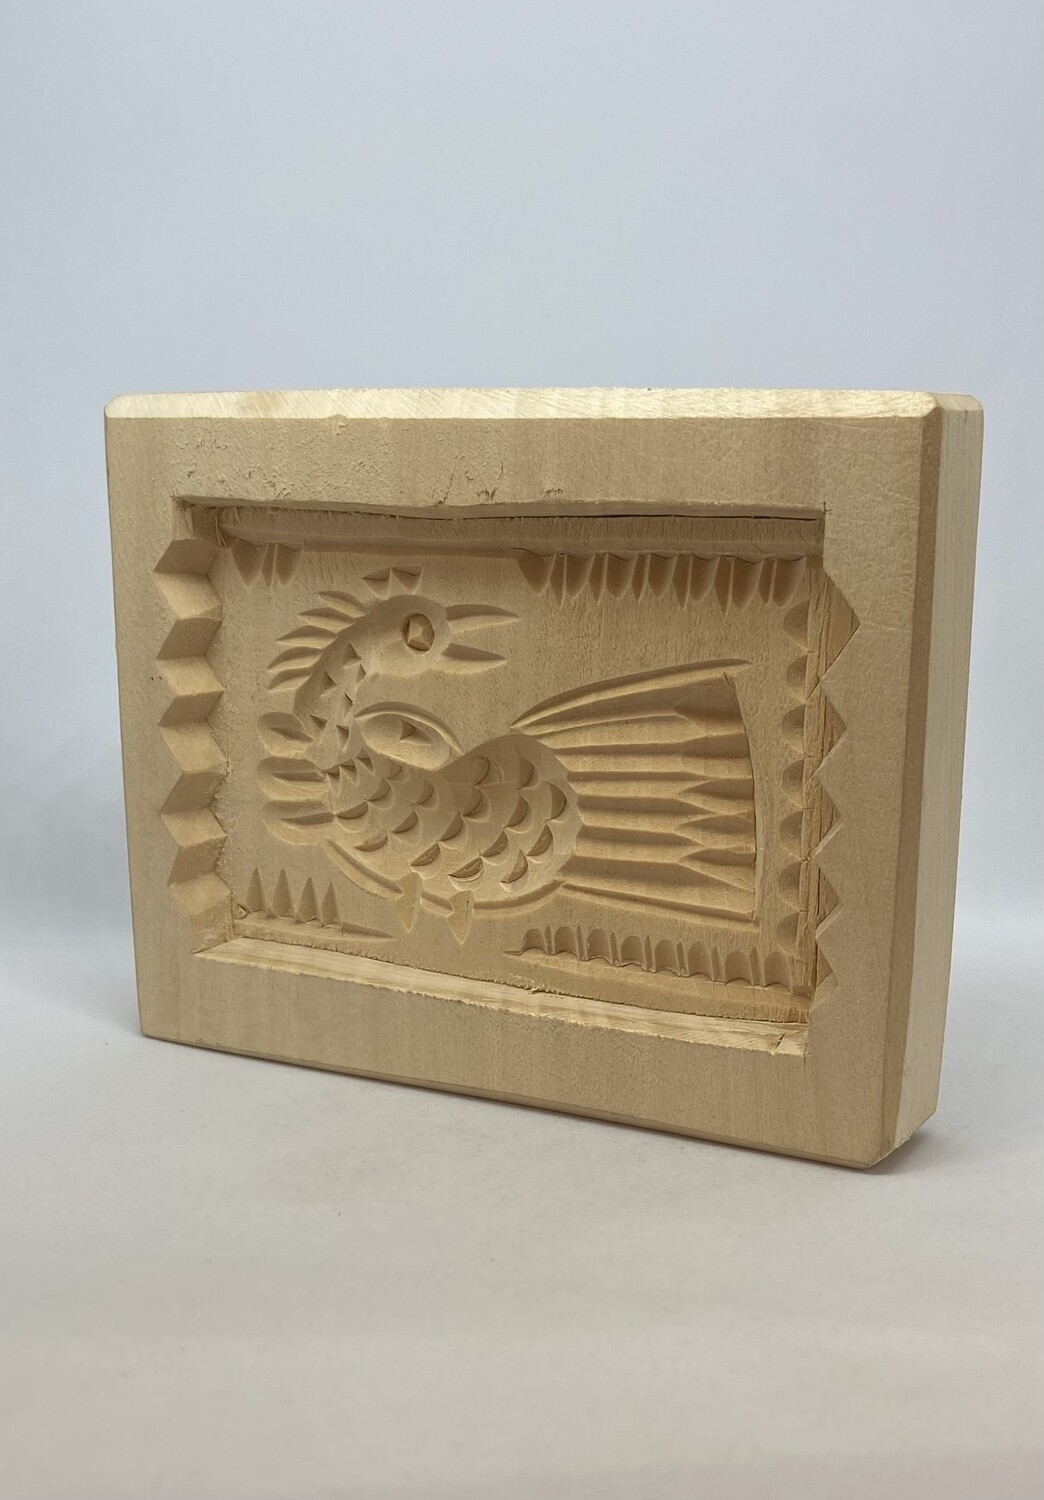 Russian Carved Wood Block Bird Cookie Mold